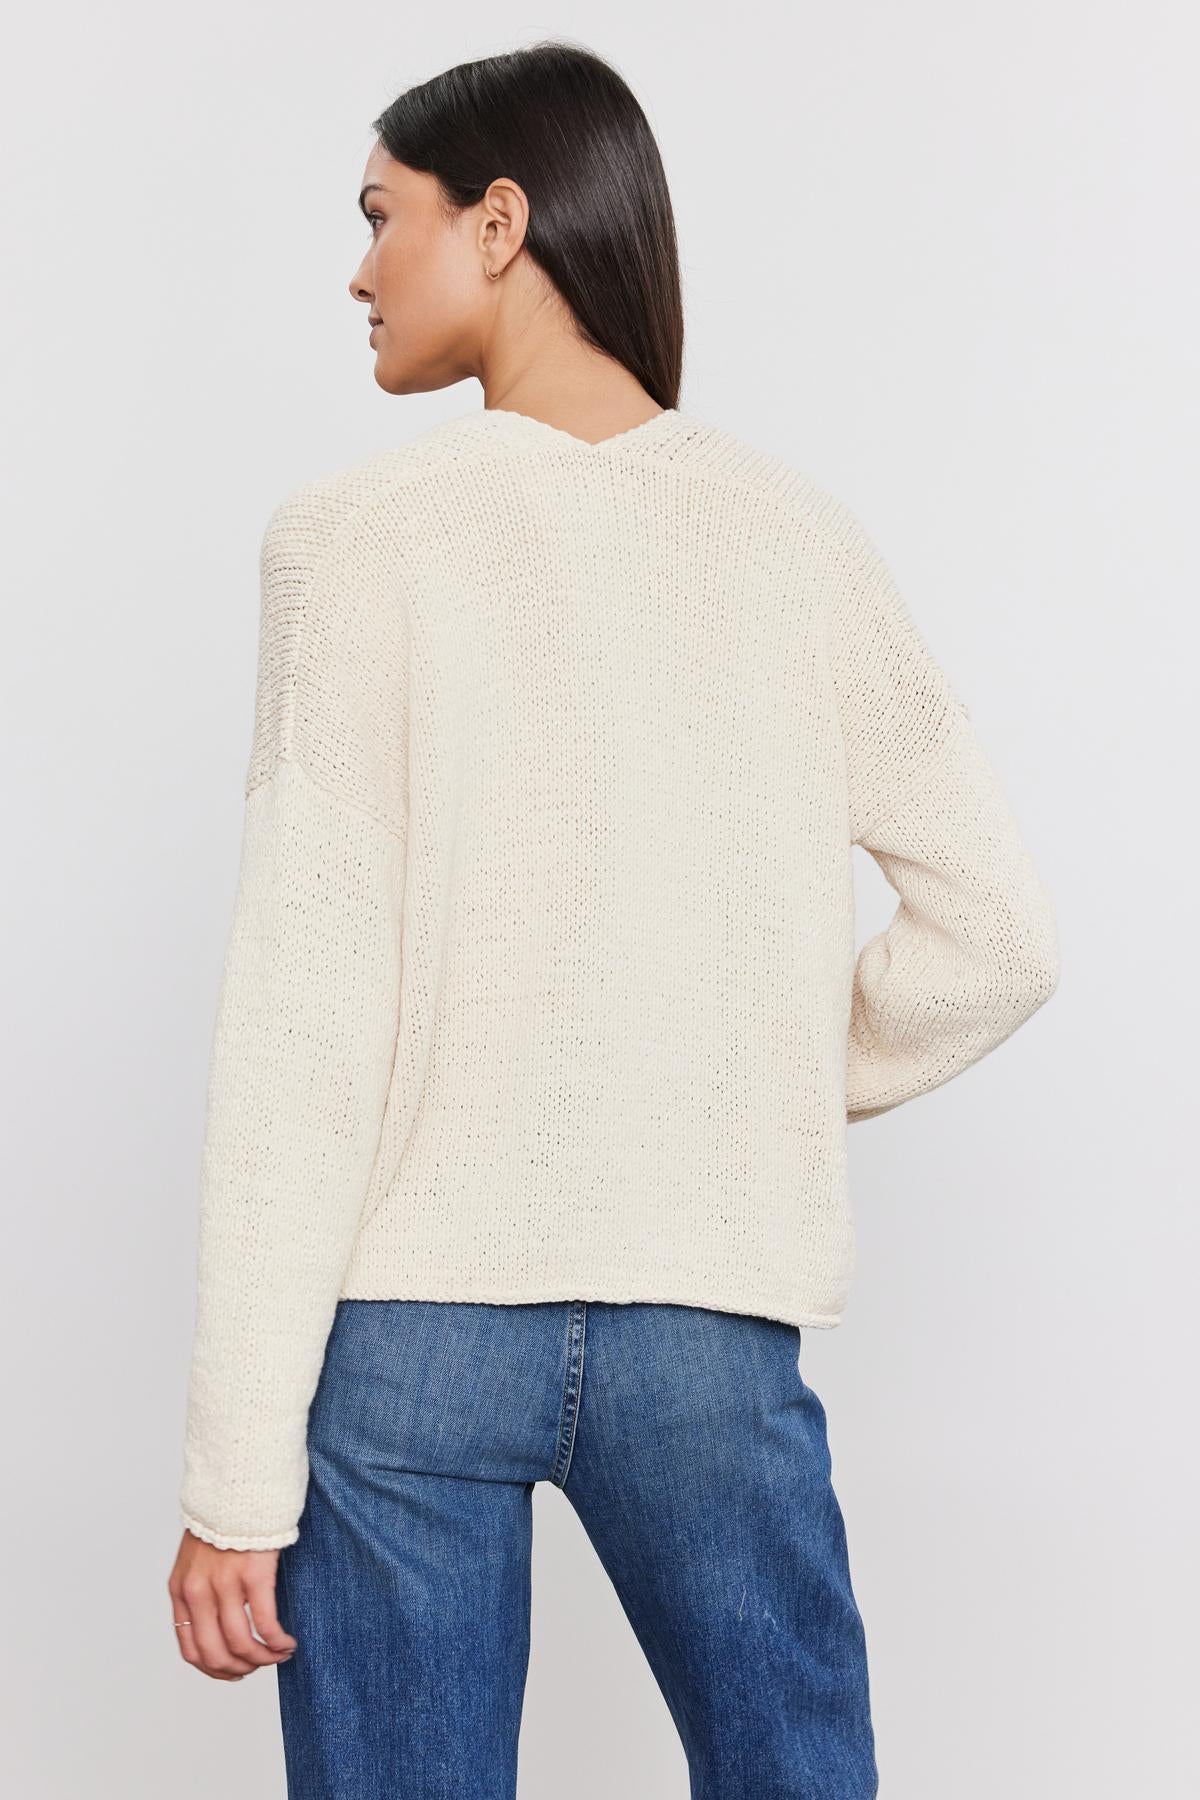 Woman standing with her back to the camera, wearing a cream knitted HOLLIE CARDIGAN from Velvet by Graham & Spencer and blue jeans.-36752930504897